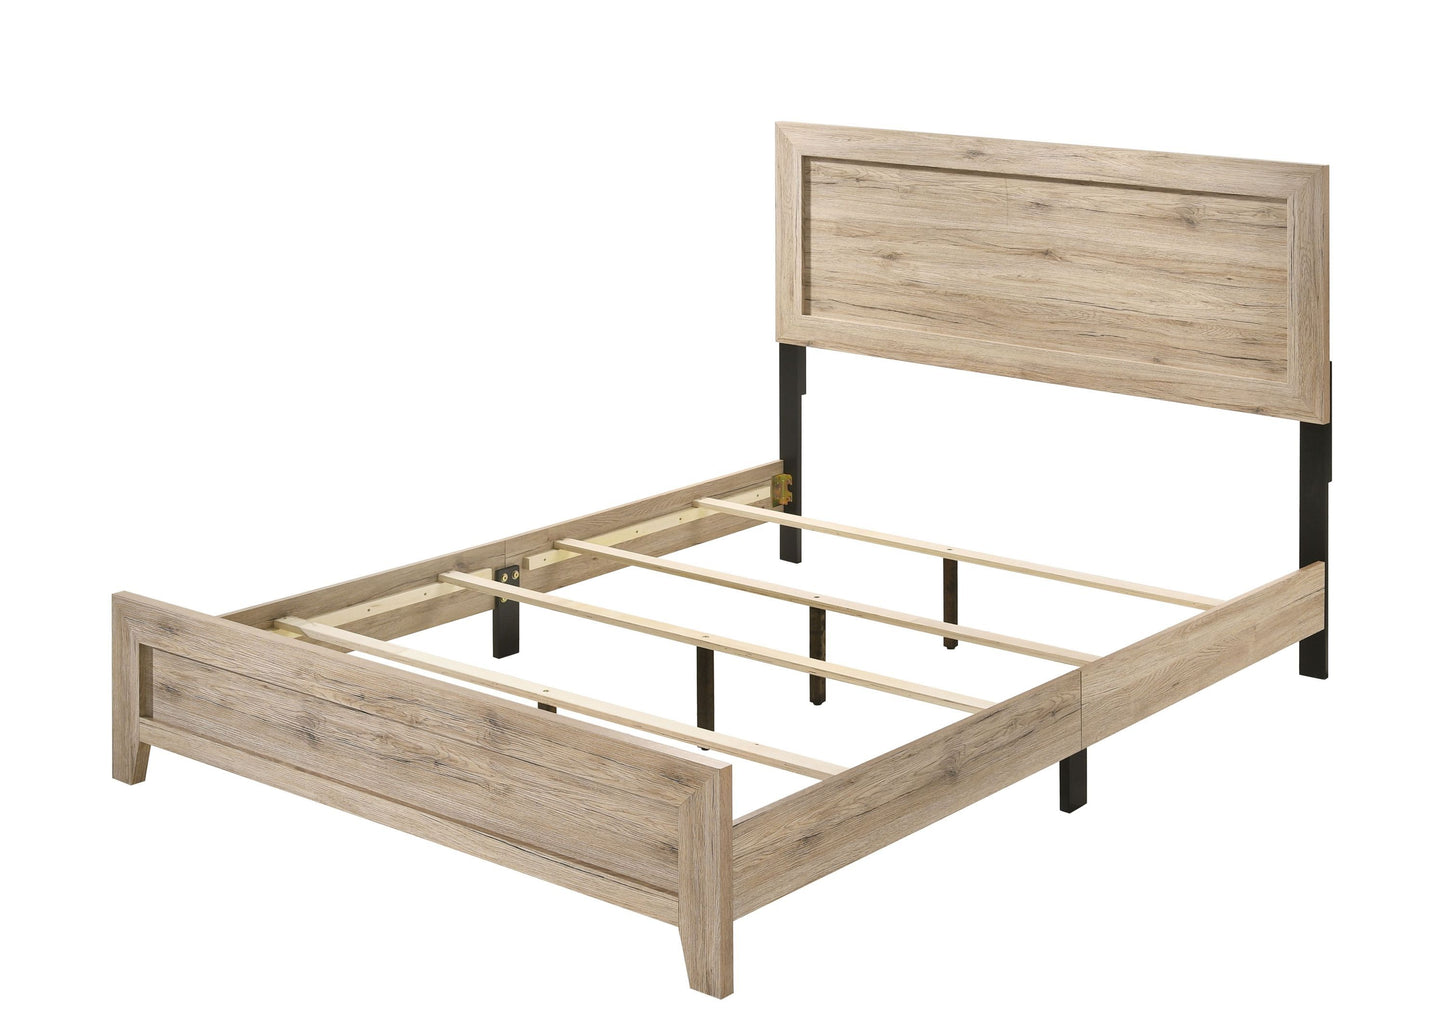 ACME Miquell Eastern King Bed, Natural